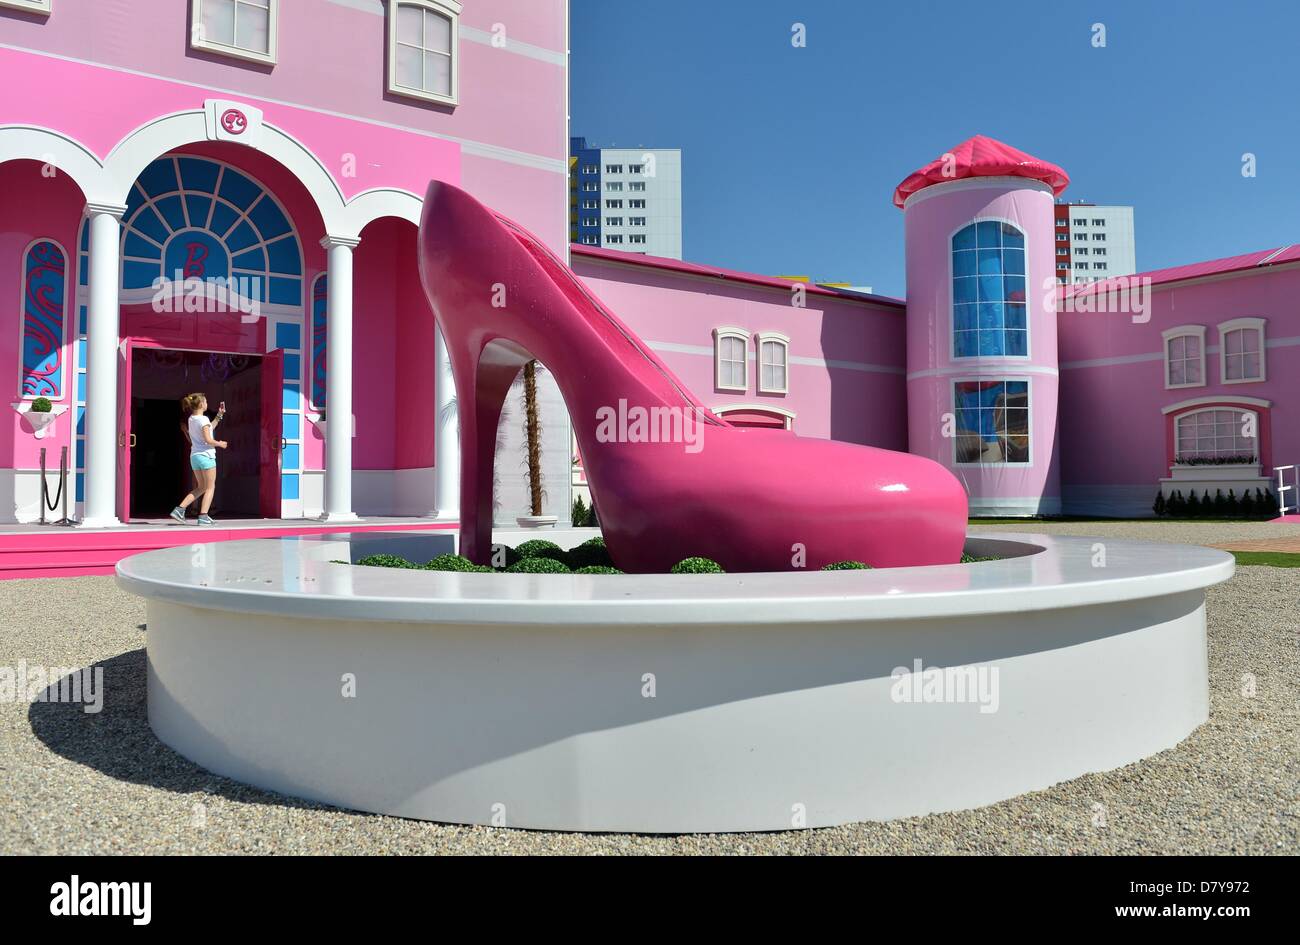 The Barbie Dreamhouse on the parking at the shopping mall Alexa near  Alexanderplatz in Berlin, Germany, 08 May 2013. The event space on 2.500 sq  m opens 16 May 2013. Photo: BRITTA PEDERSEN Stock Photo - Alamy